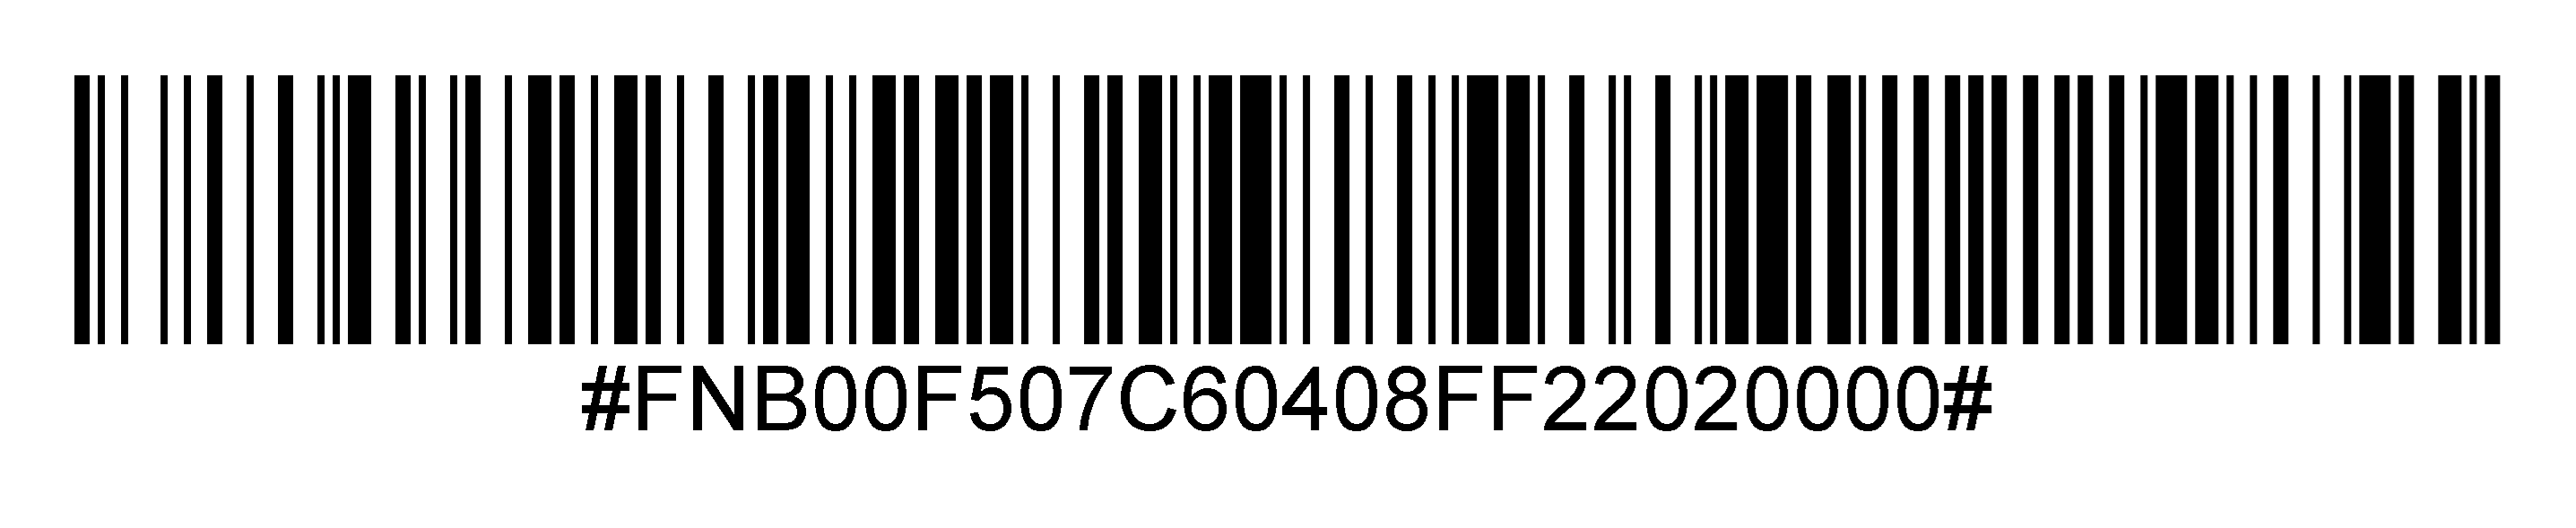 Add a leading zero to UPC-A barcodes